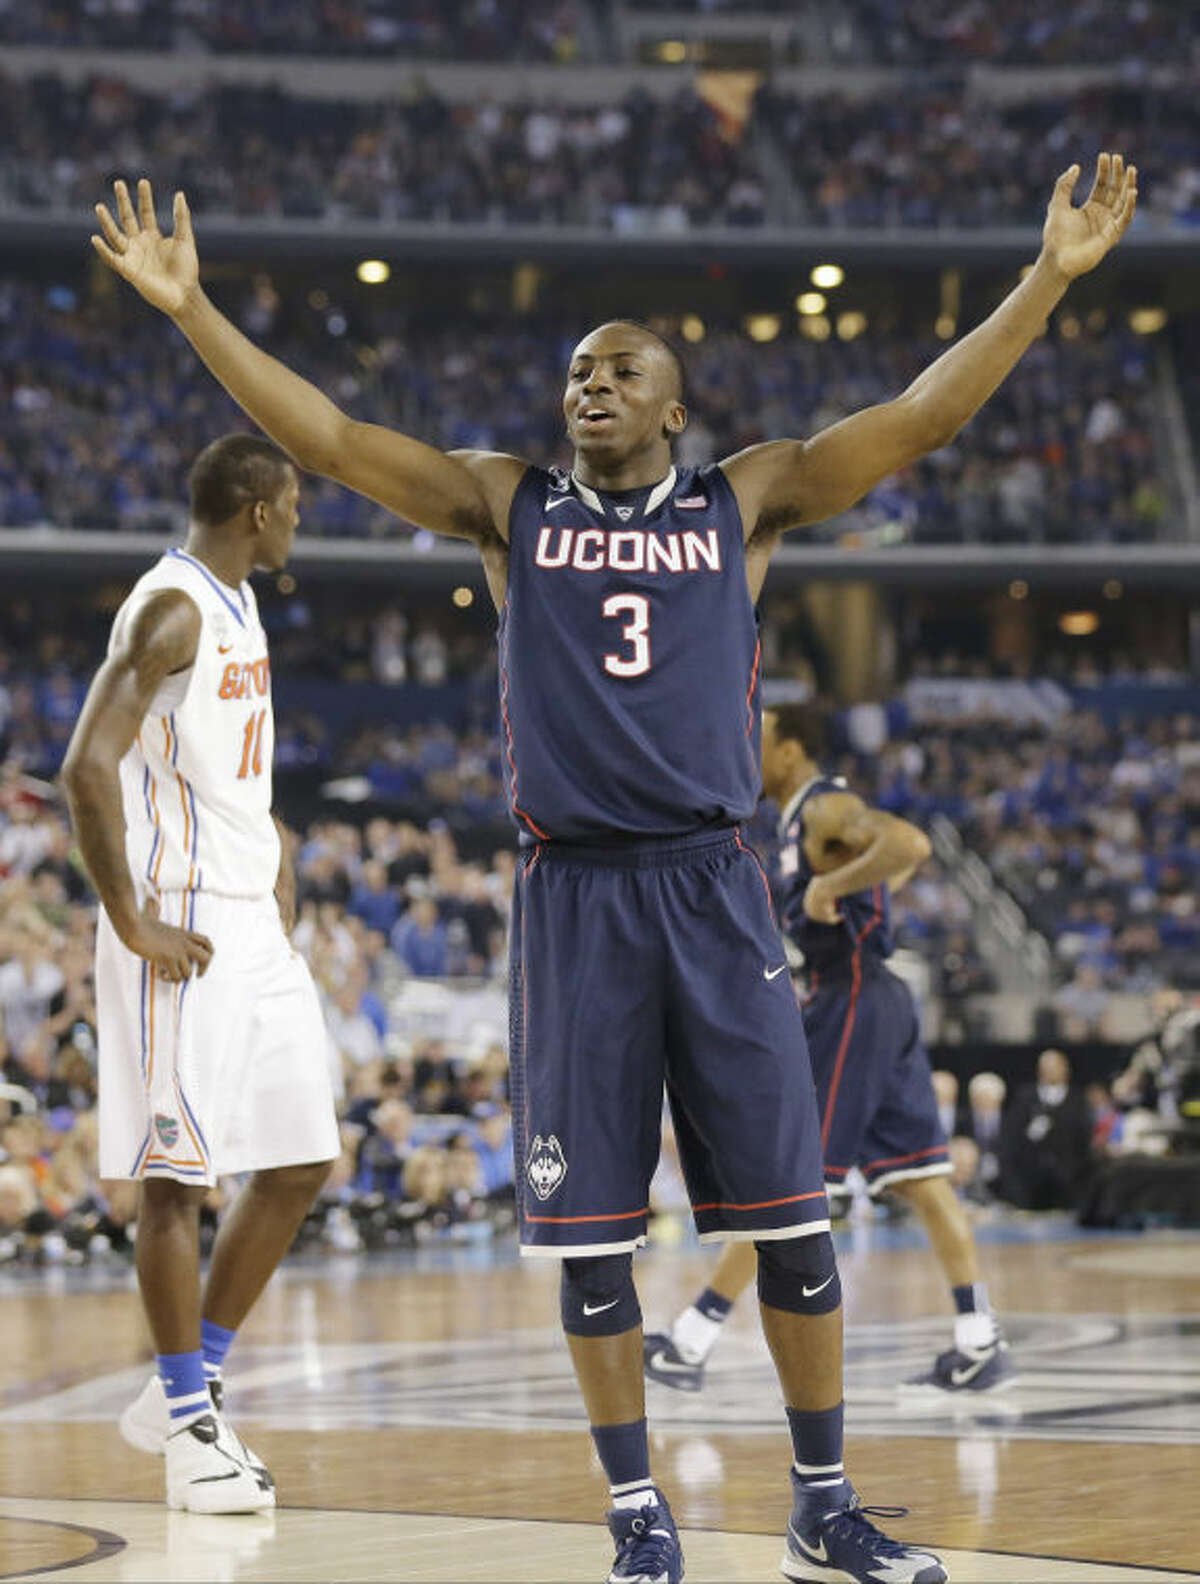 Connecticut guard Terrence Samuel celebrates against Florida during the second half of the NCAA Final Four tournament college basketball semifinal game Saturday, April 5, 2014, in Arlington, Texas. (AP Photo/Eric Gay)